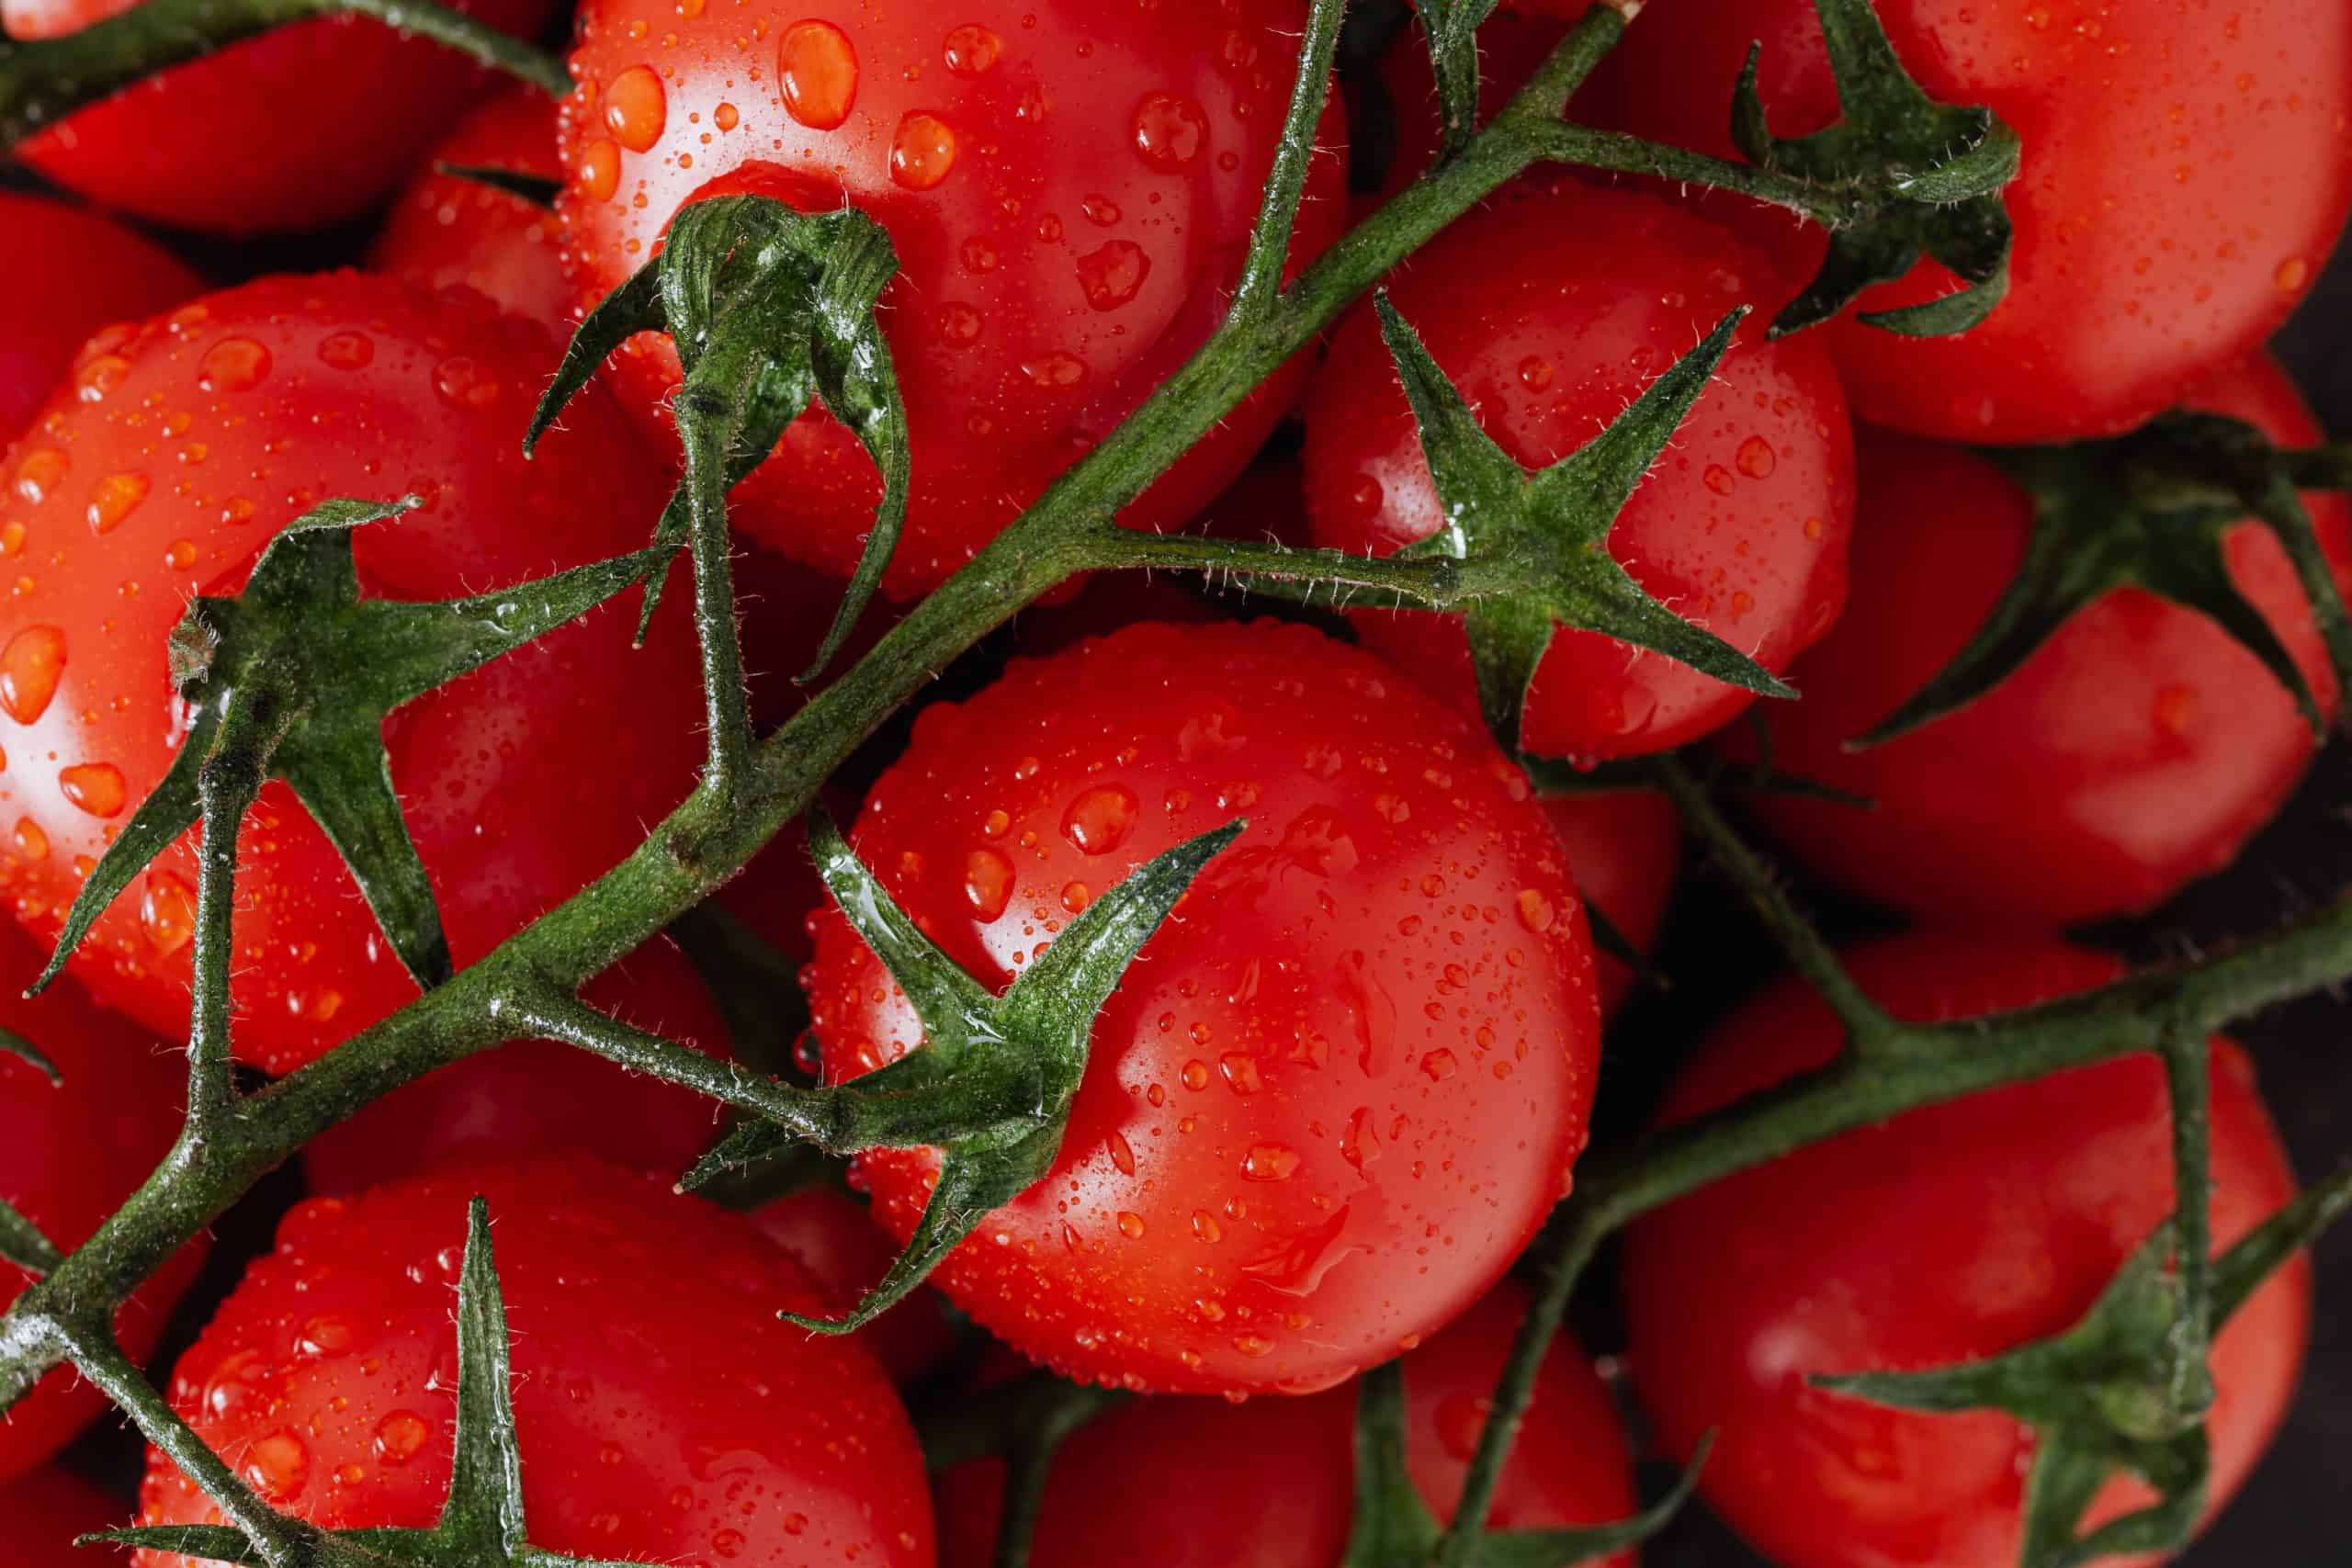 How to Choose the Best Organic Tomatoes in Crossville